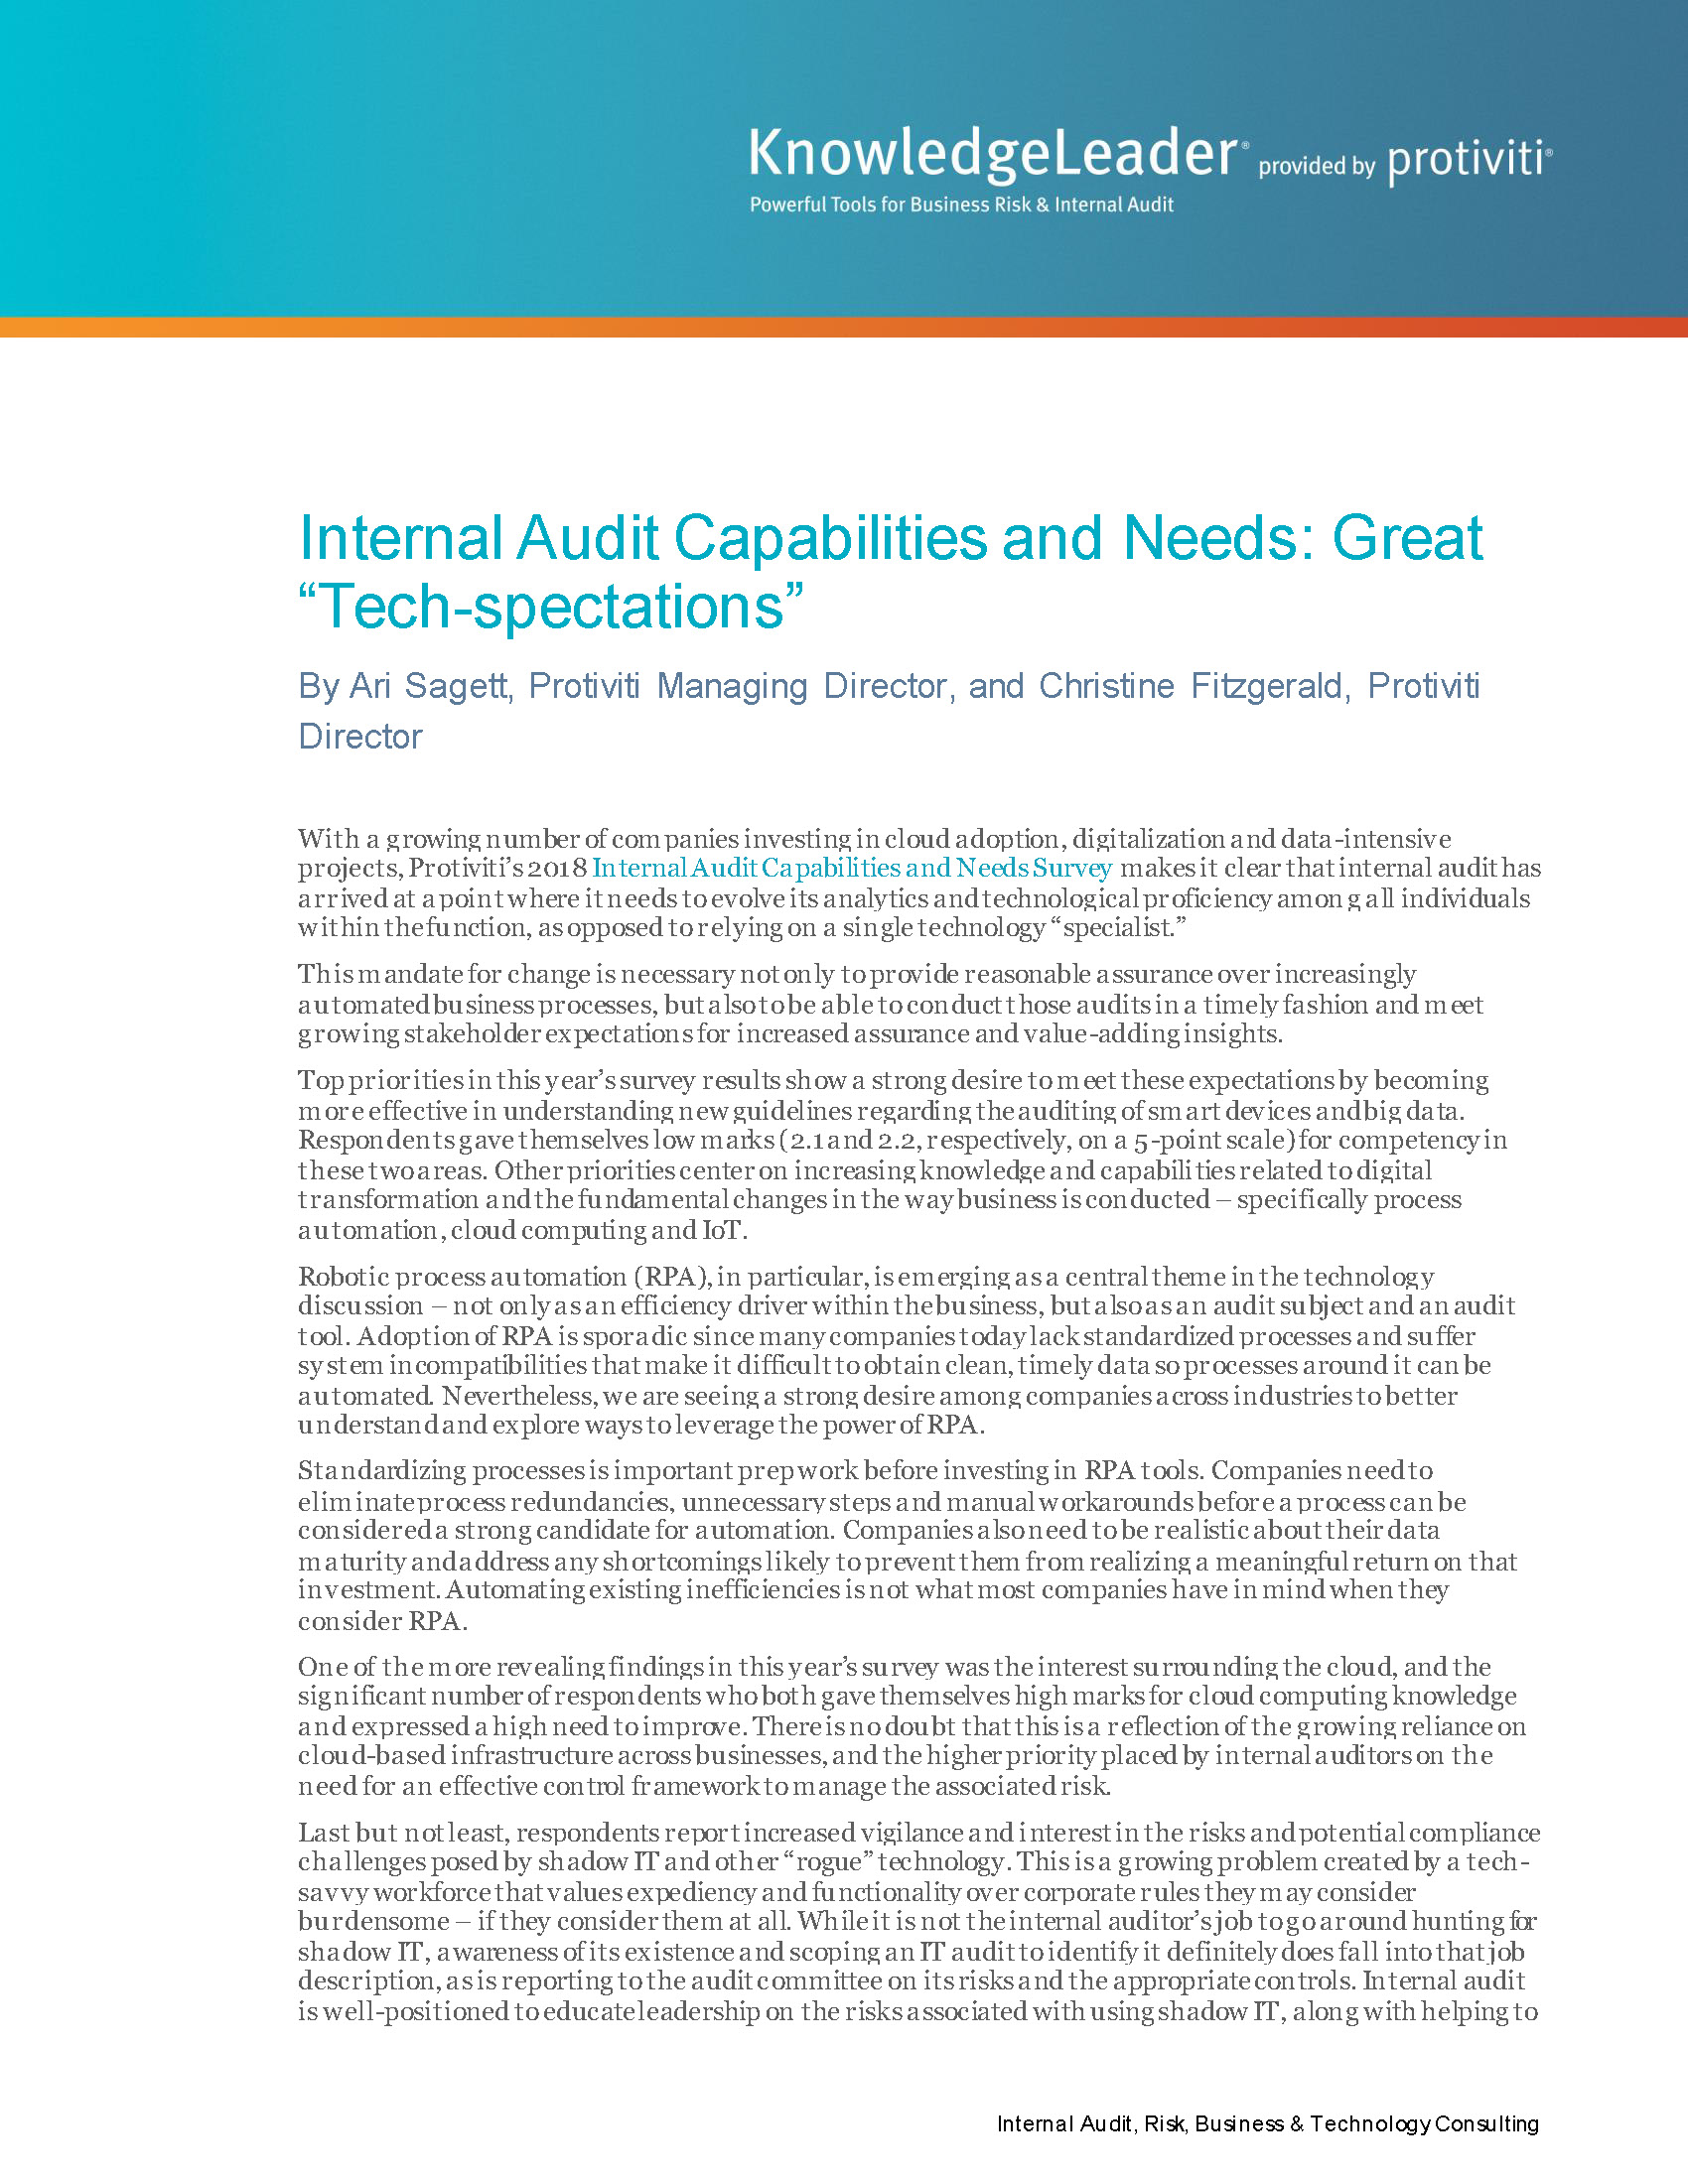 Screenshot of the first page of Internal Audit Capabilities and Needs Great “Tech-Spectations”